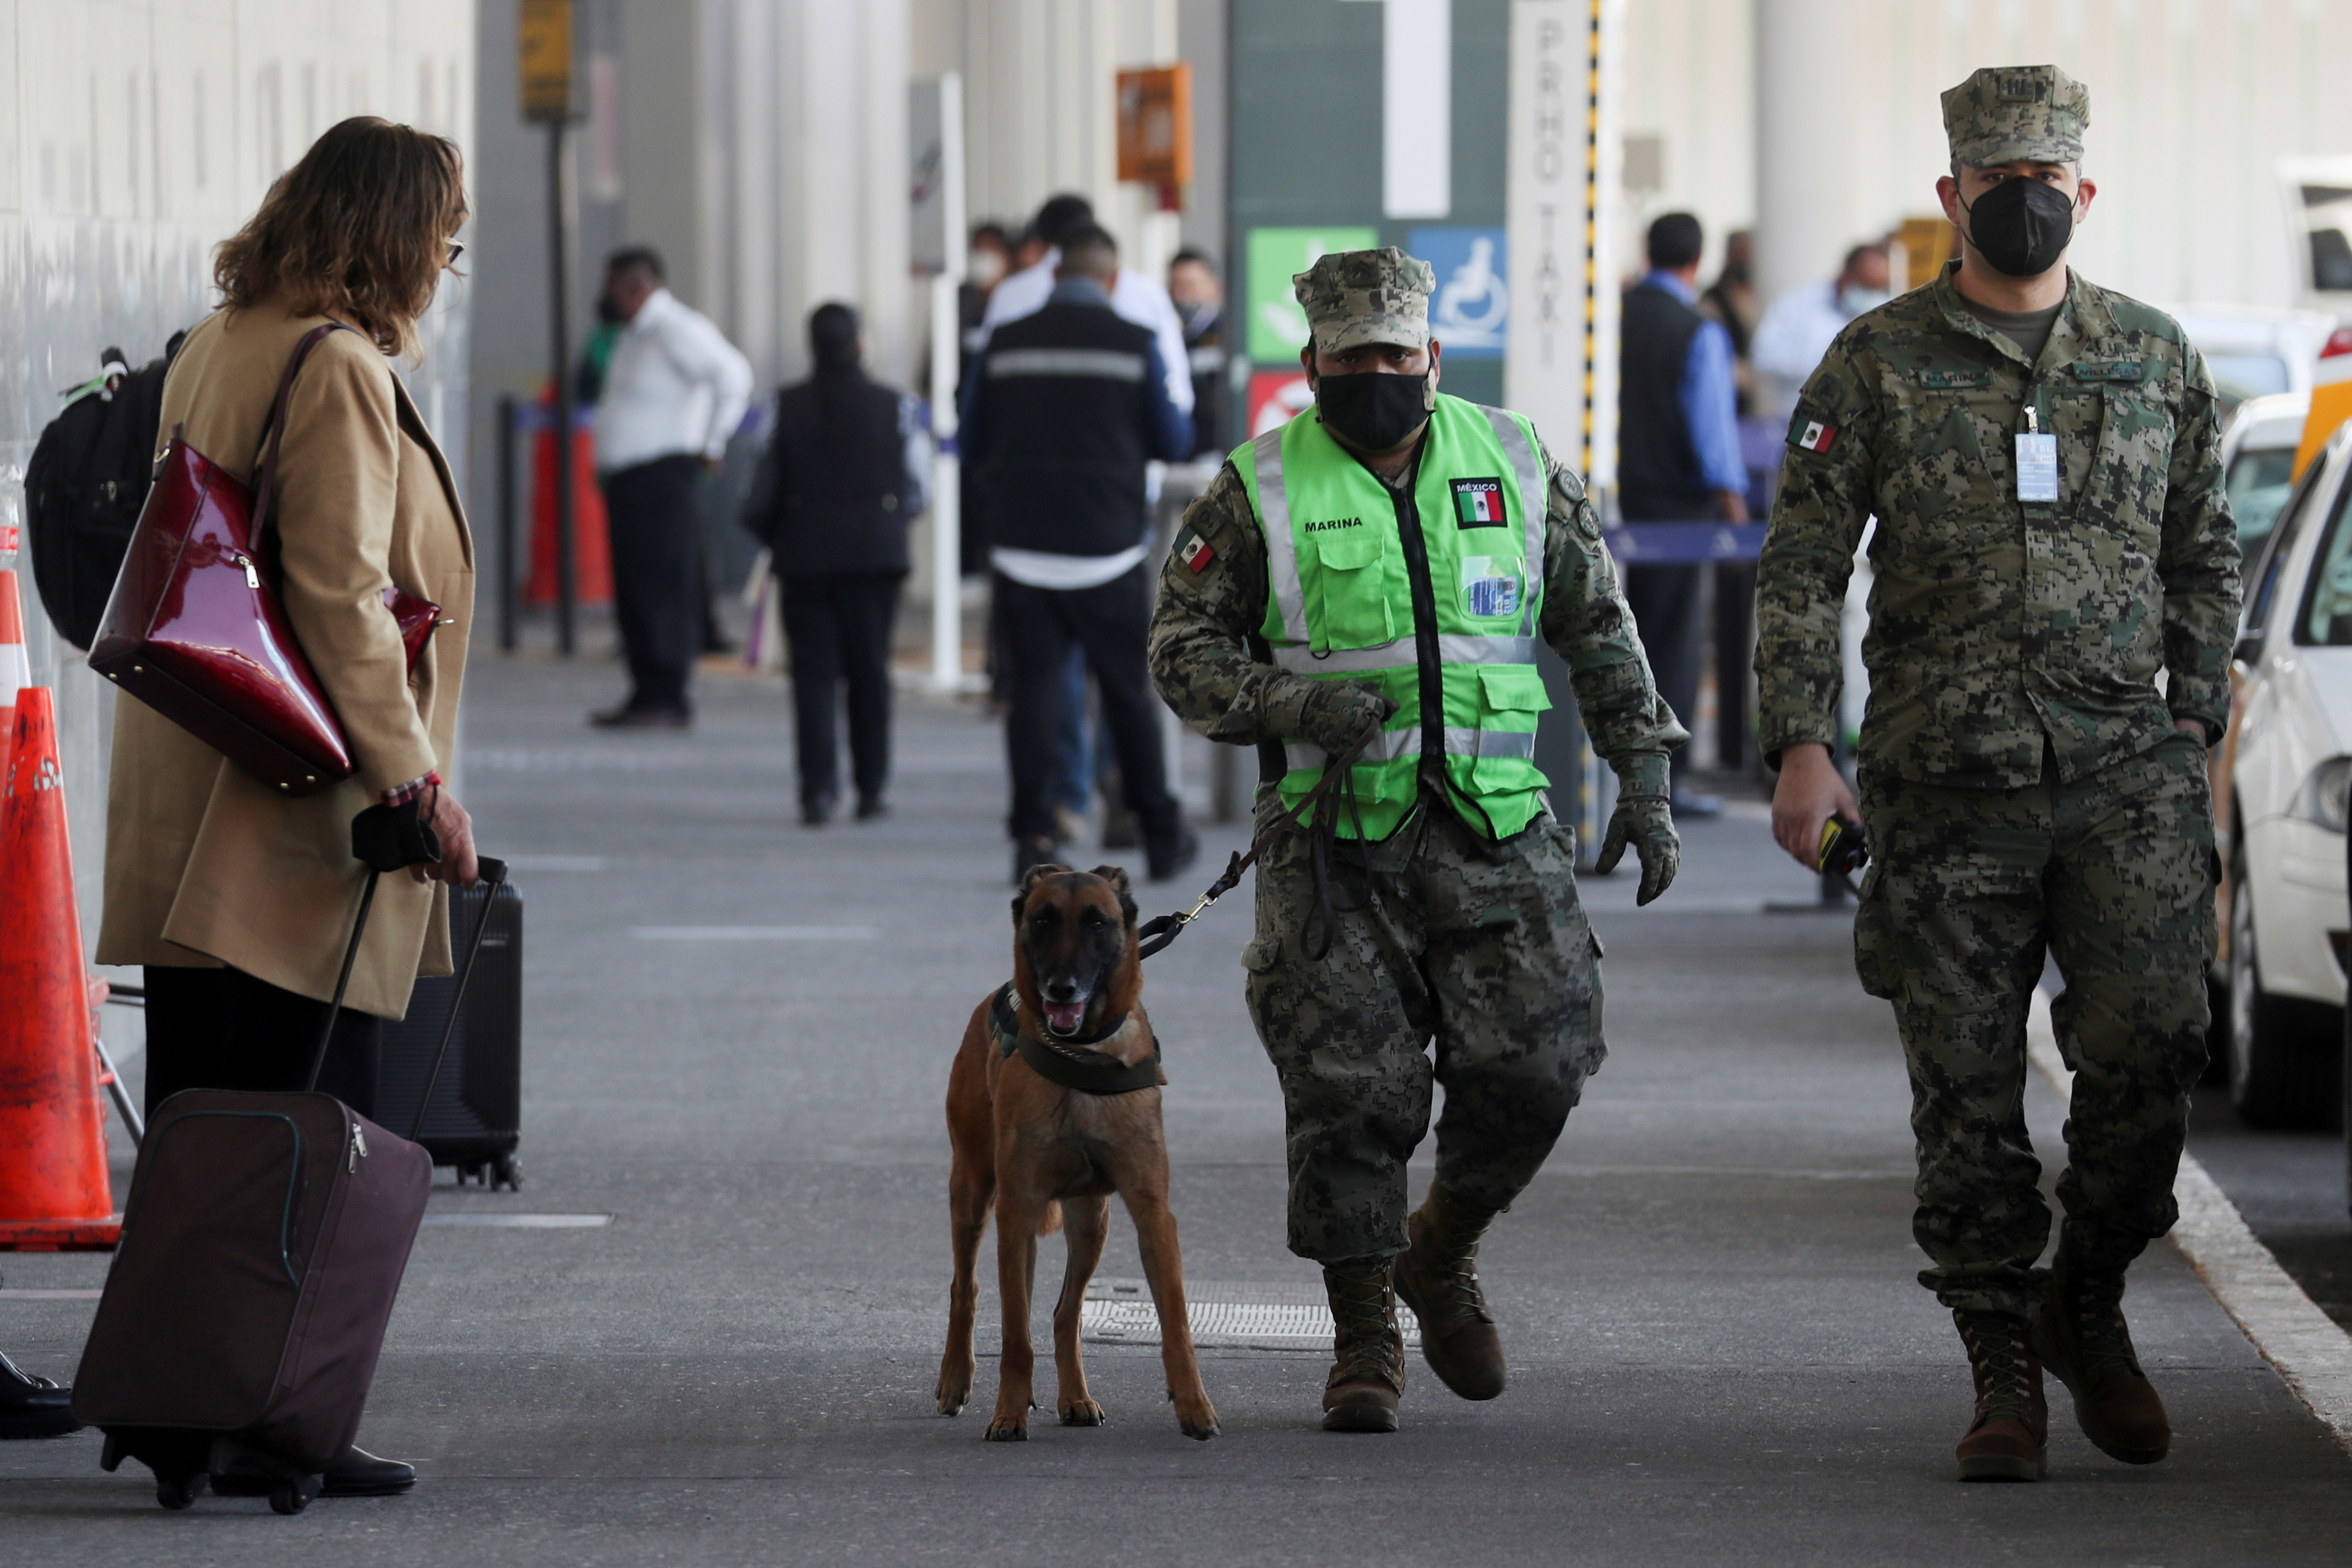 Security operation against the trafficking of weapons, drugs and people at at Benito Juarez international airport